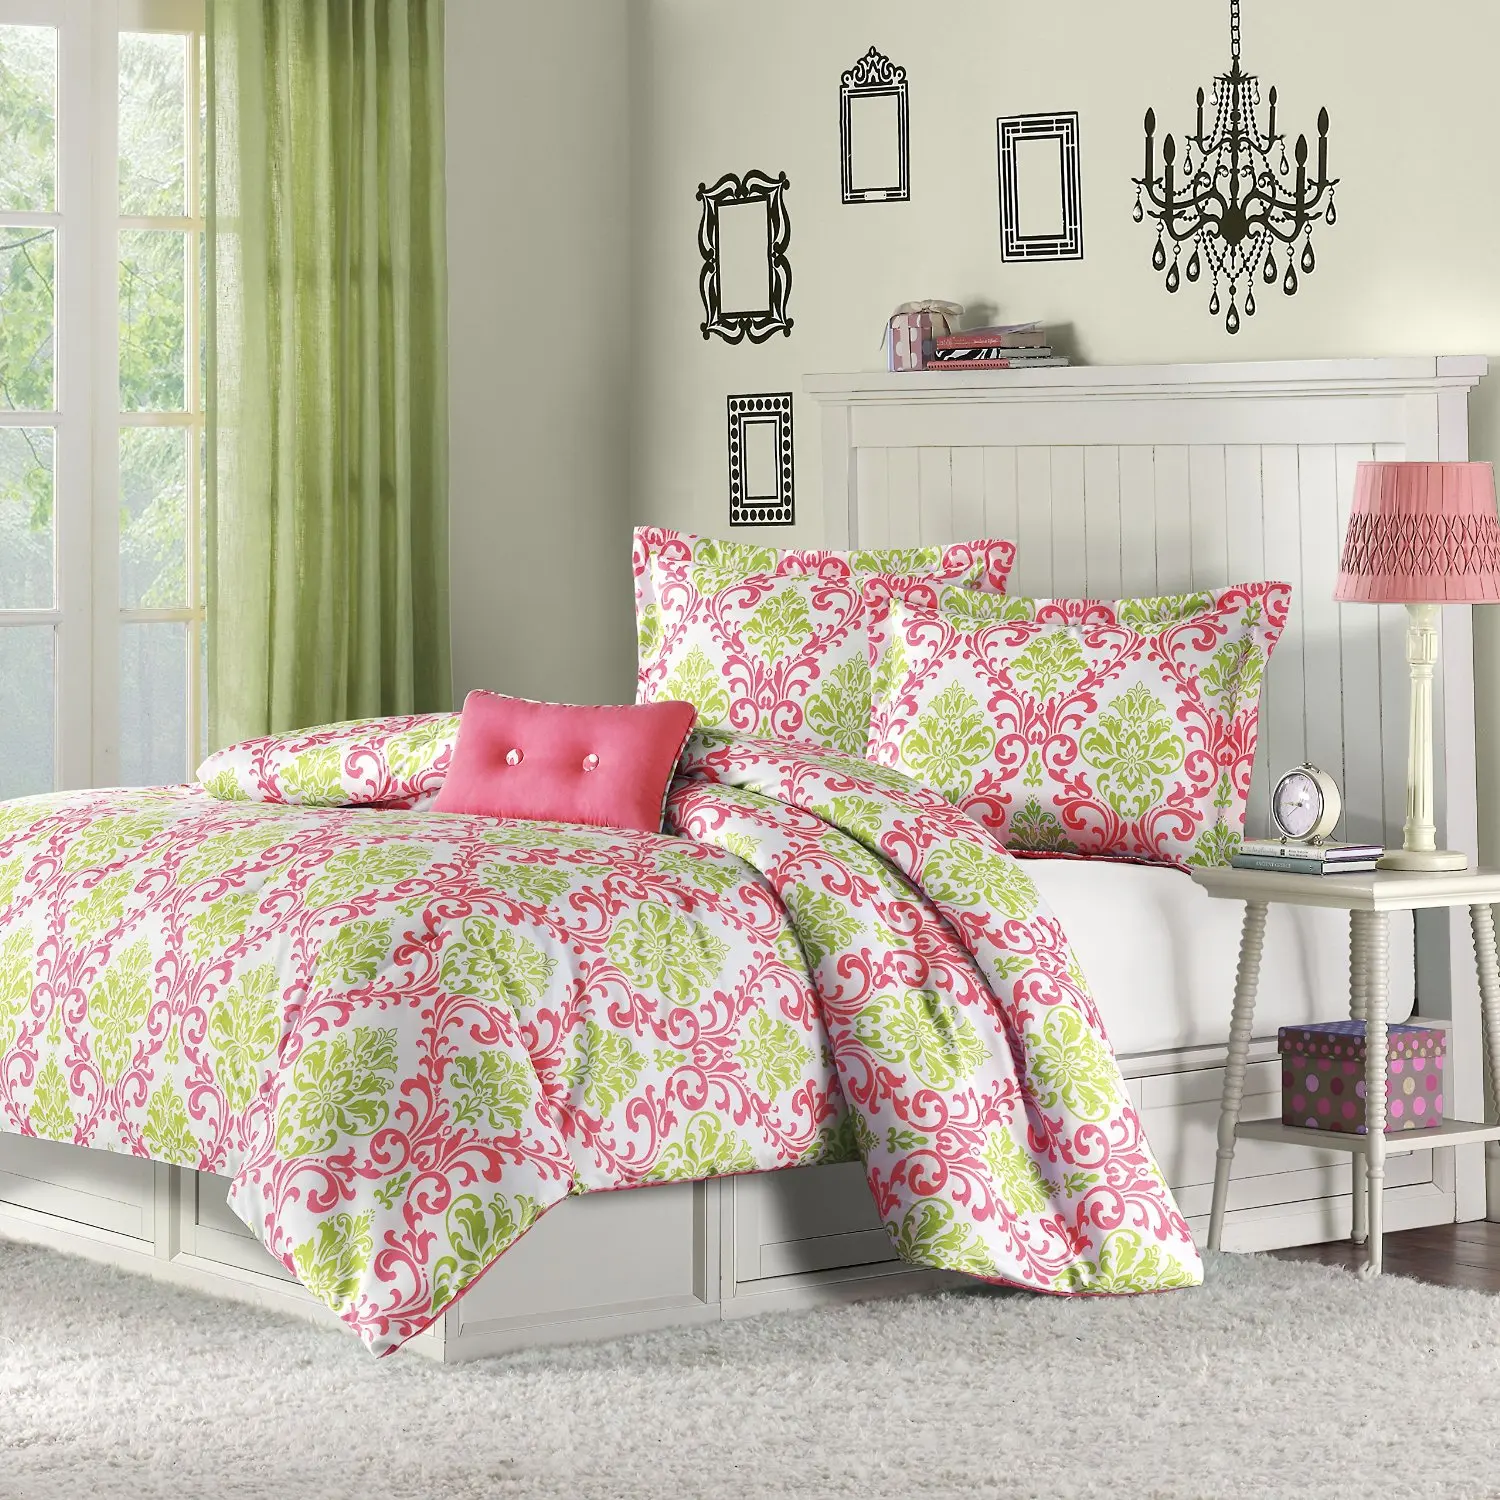 Cheap Green Twin Comforter Sets Find Green Twin Comforter Sets